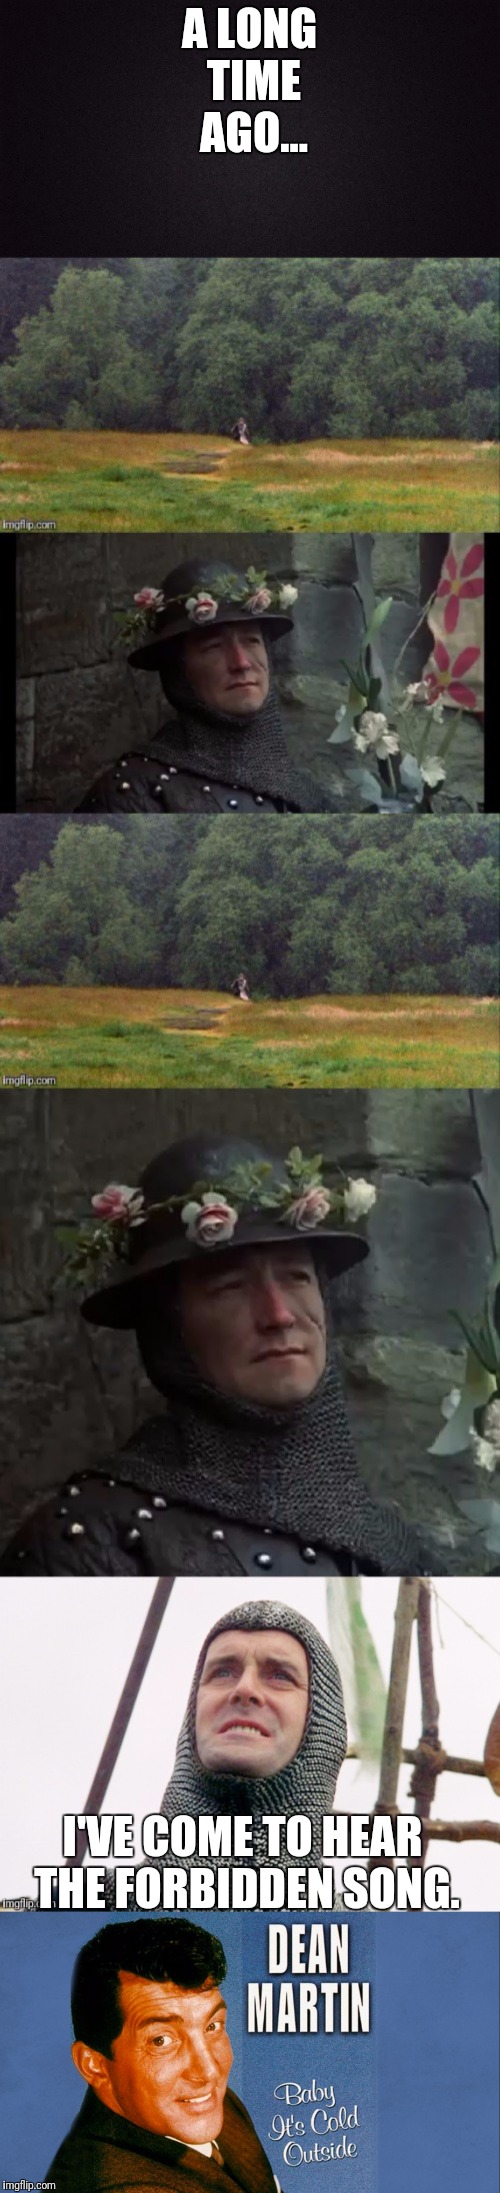 A Quest For A Brave Man Full Of Courage And Of Sound Mind The Quest Not For Gold Or Silver Nut Of Something,Something Elsewhere. | A LONG TIME AGO... I'VE COME TO HEAR THE FORBIDDEN SONG. | image tagged in monty python and the holy grail,holy grail,john cleese,dean martin | made w/ Imgflip meme maker